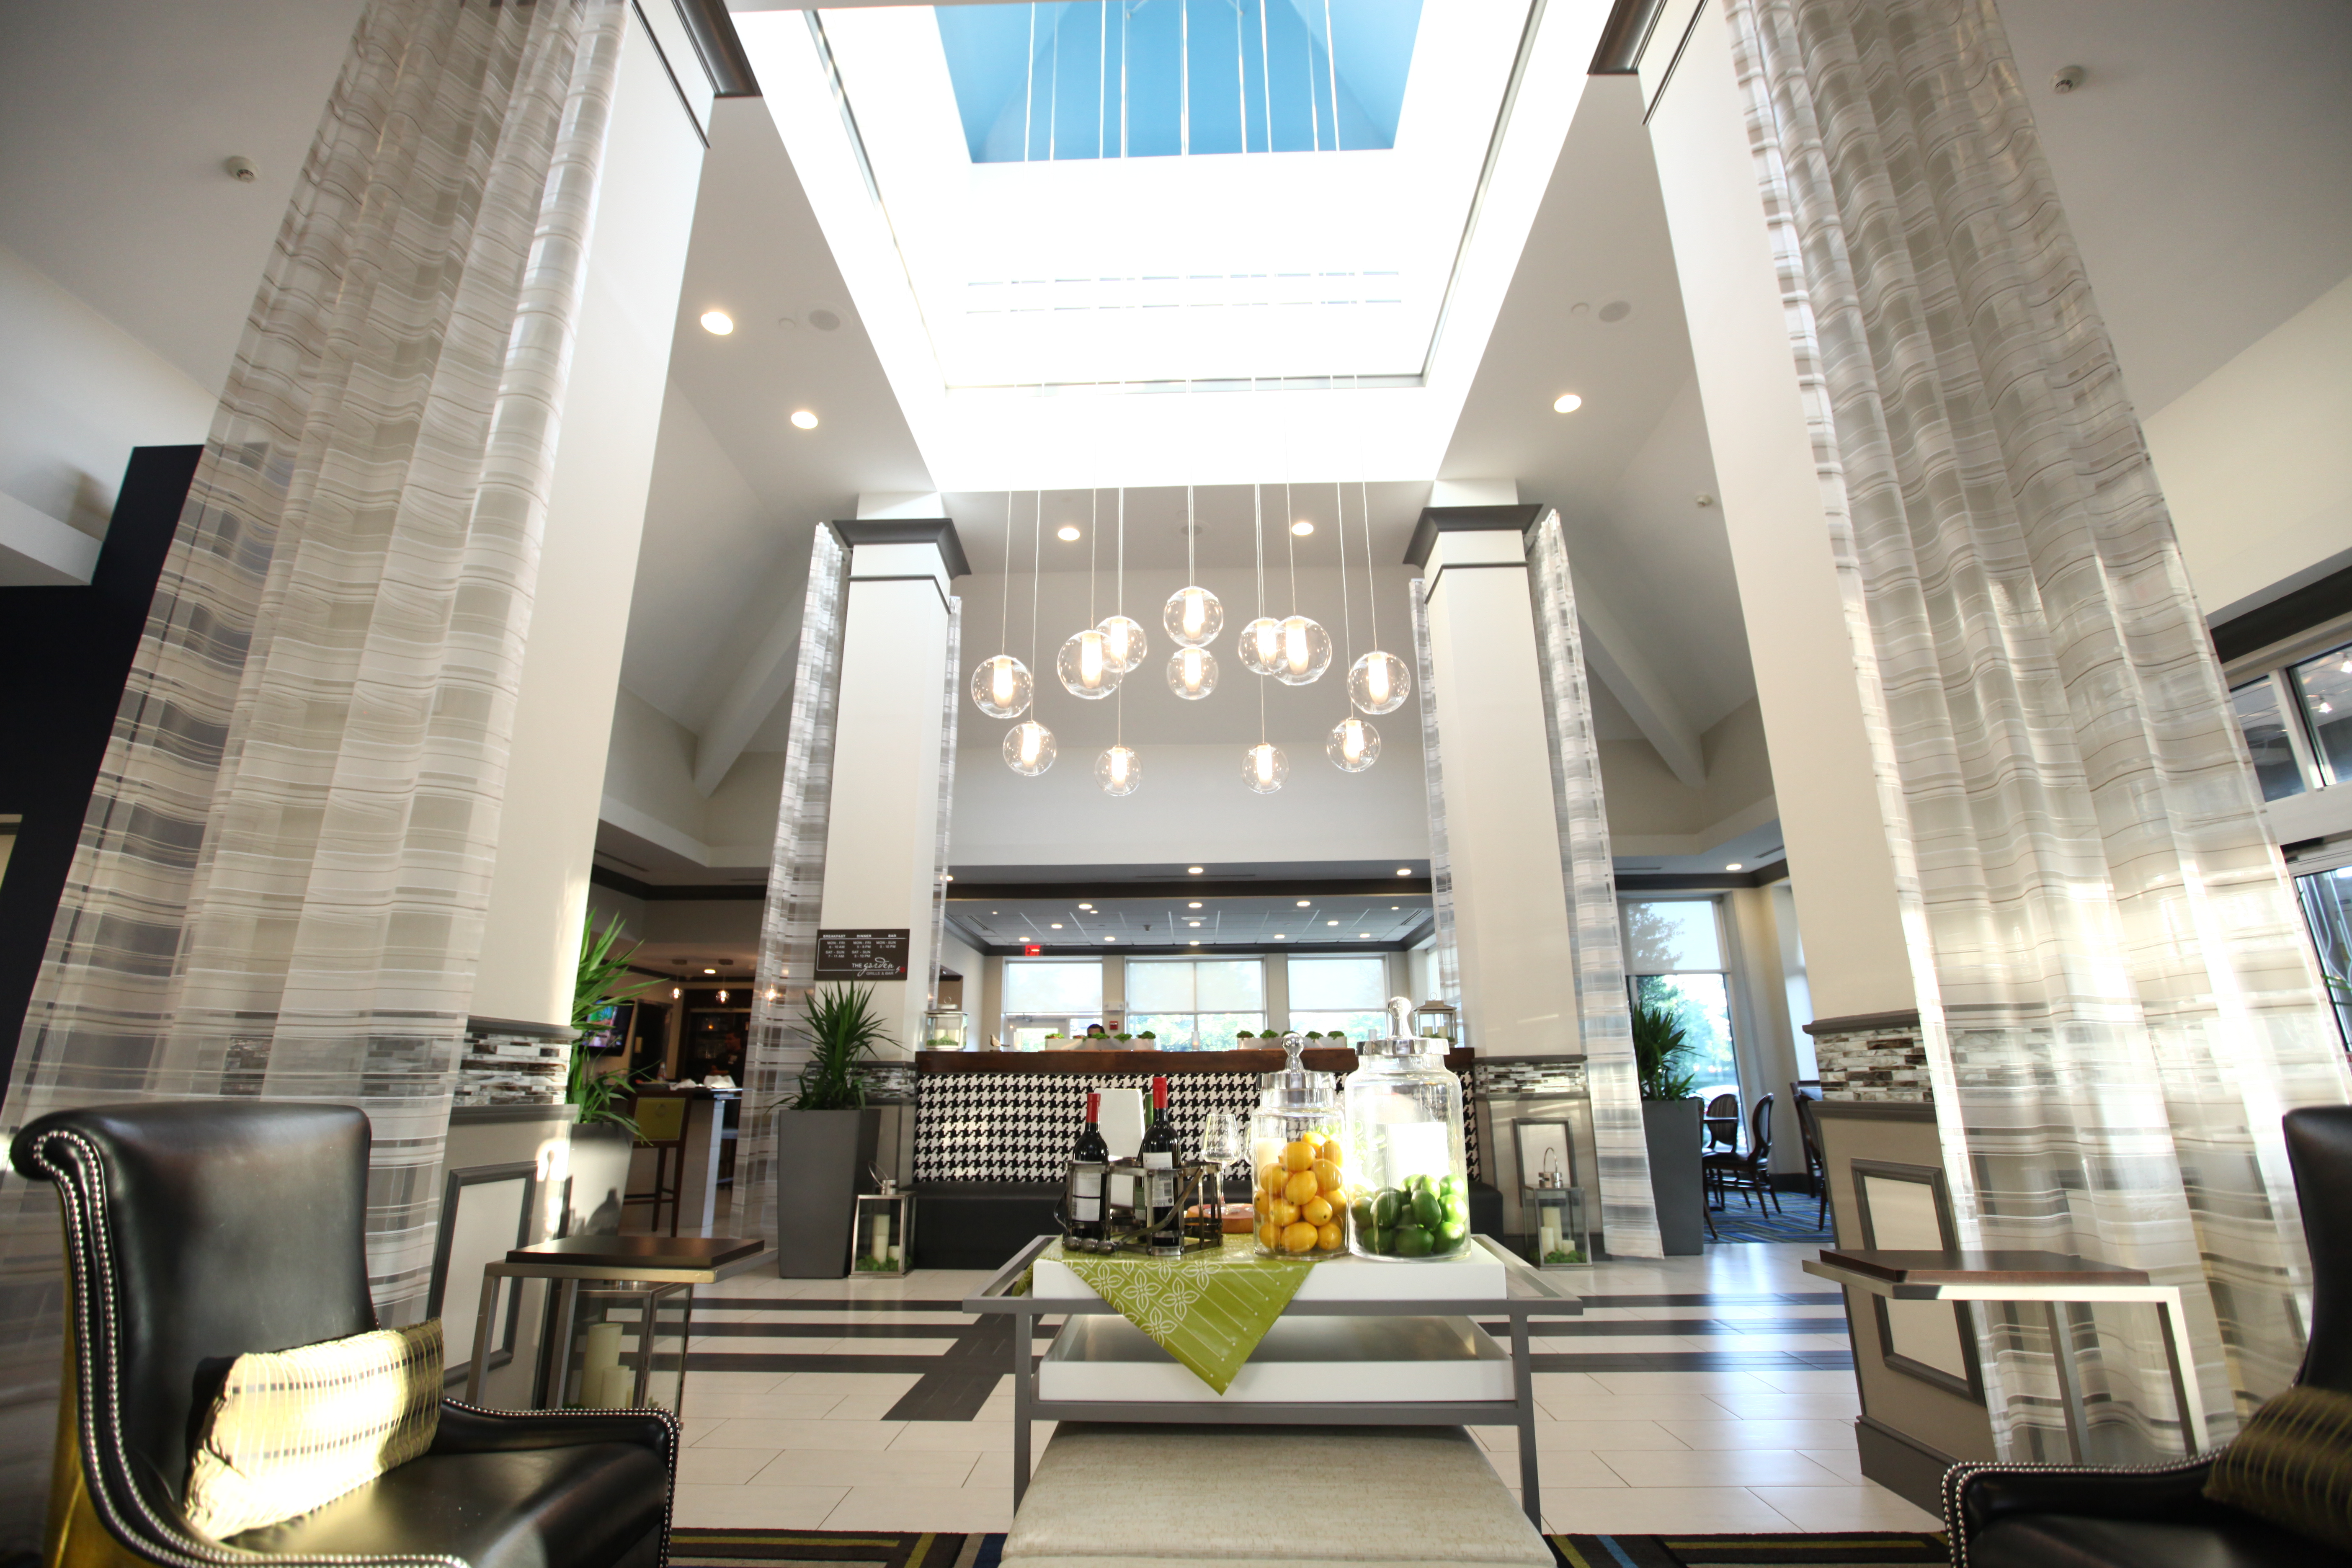 Lobby With Long Drapes, Soft Seating, and Beverage Station